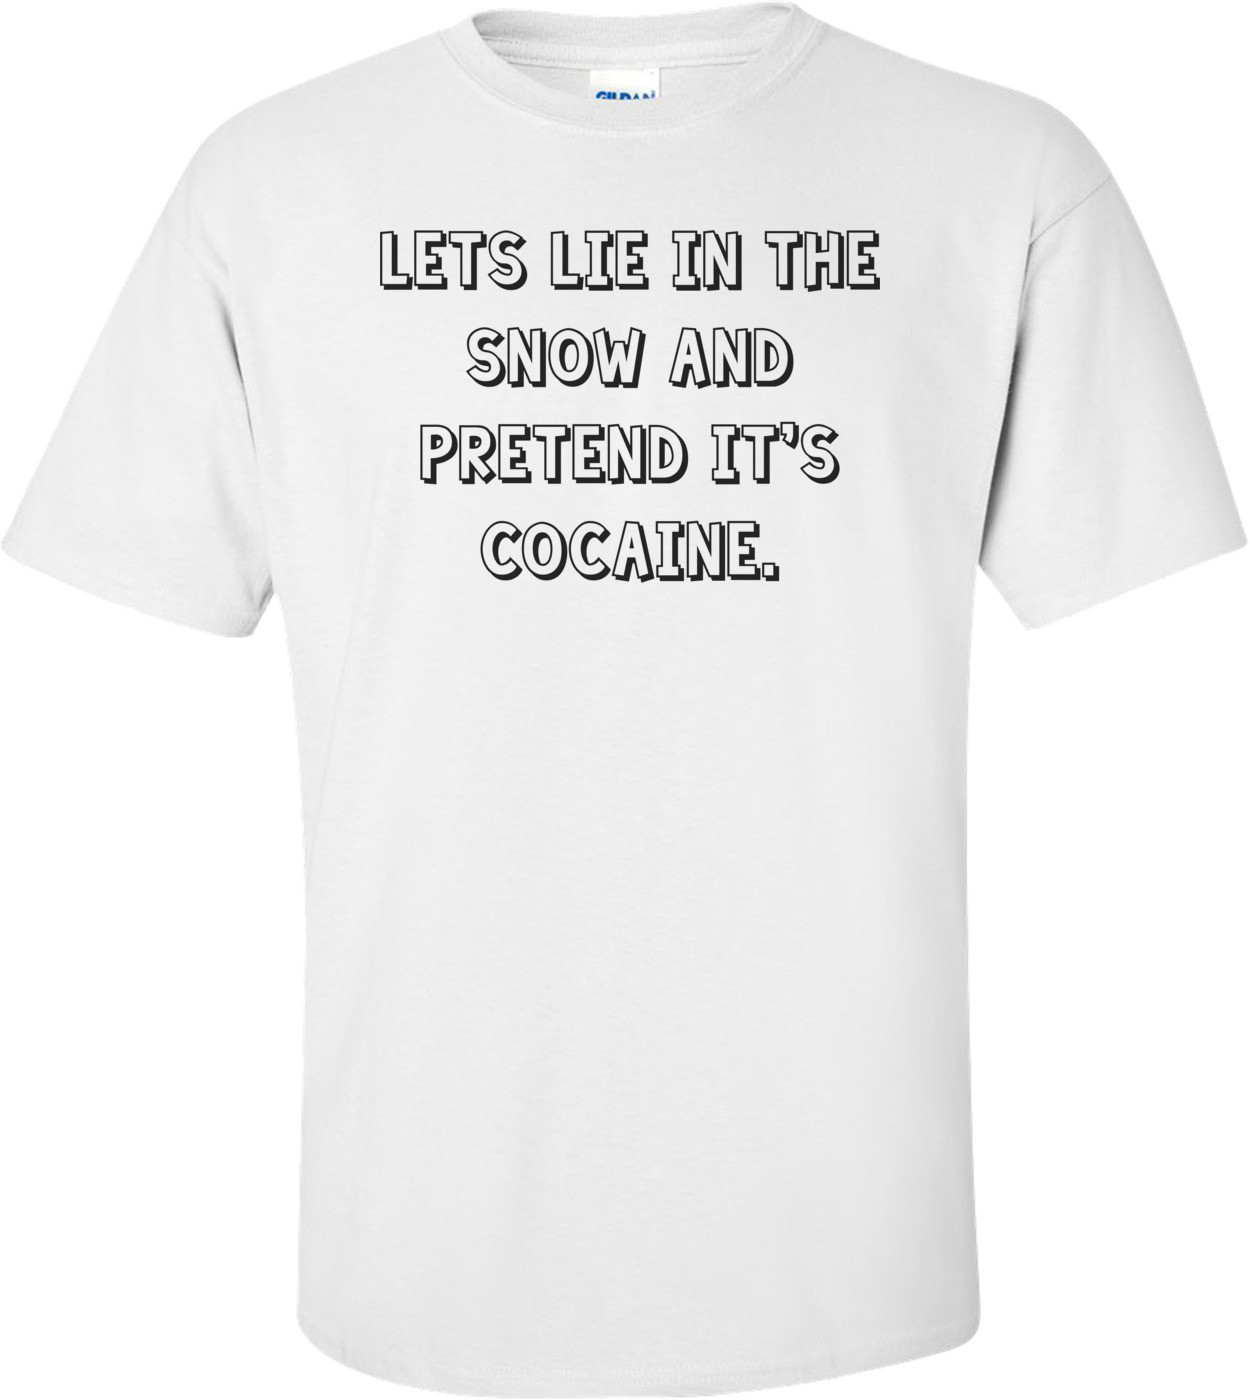 Lets lie in the snow and pretend it's cocaine. Shirt